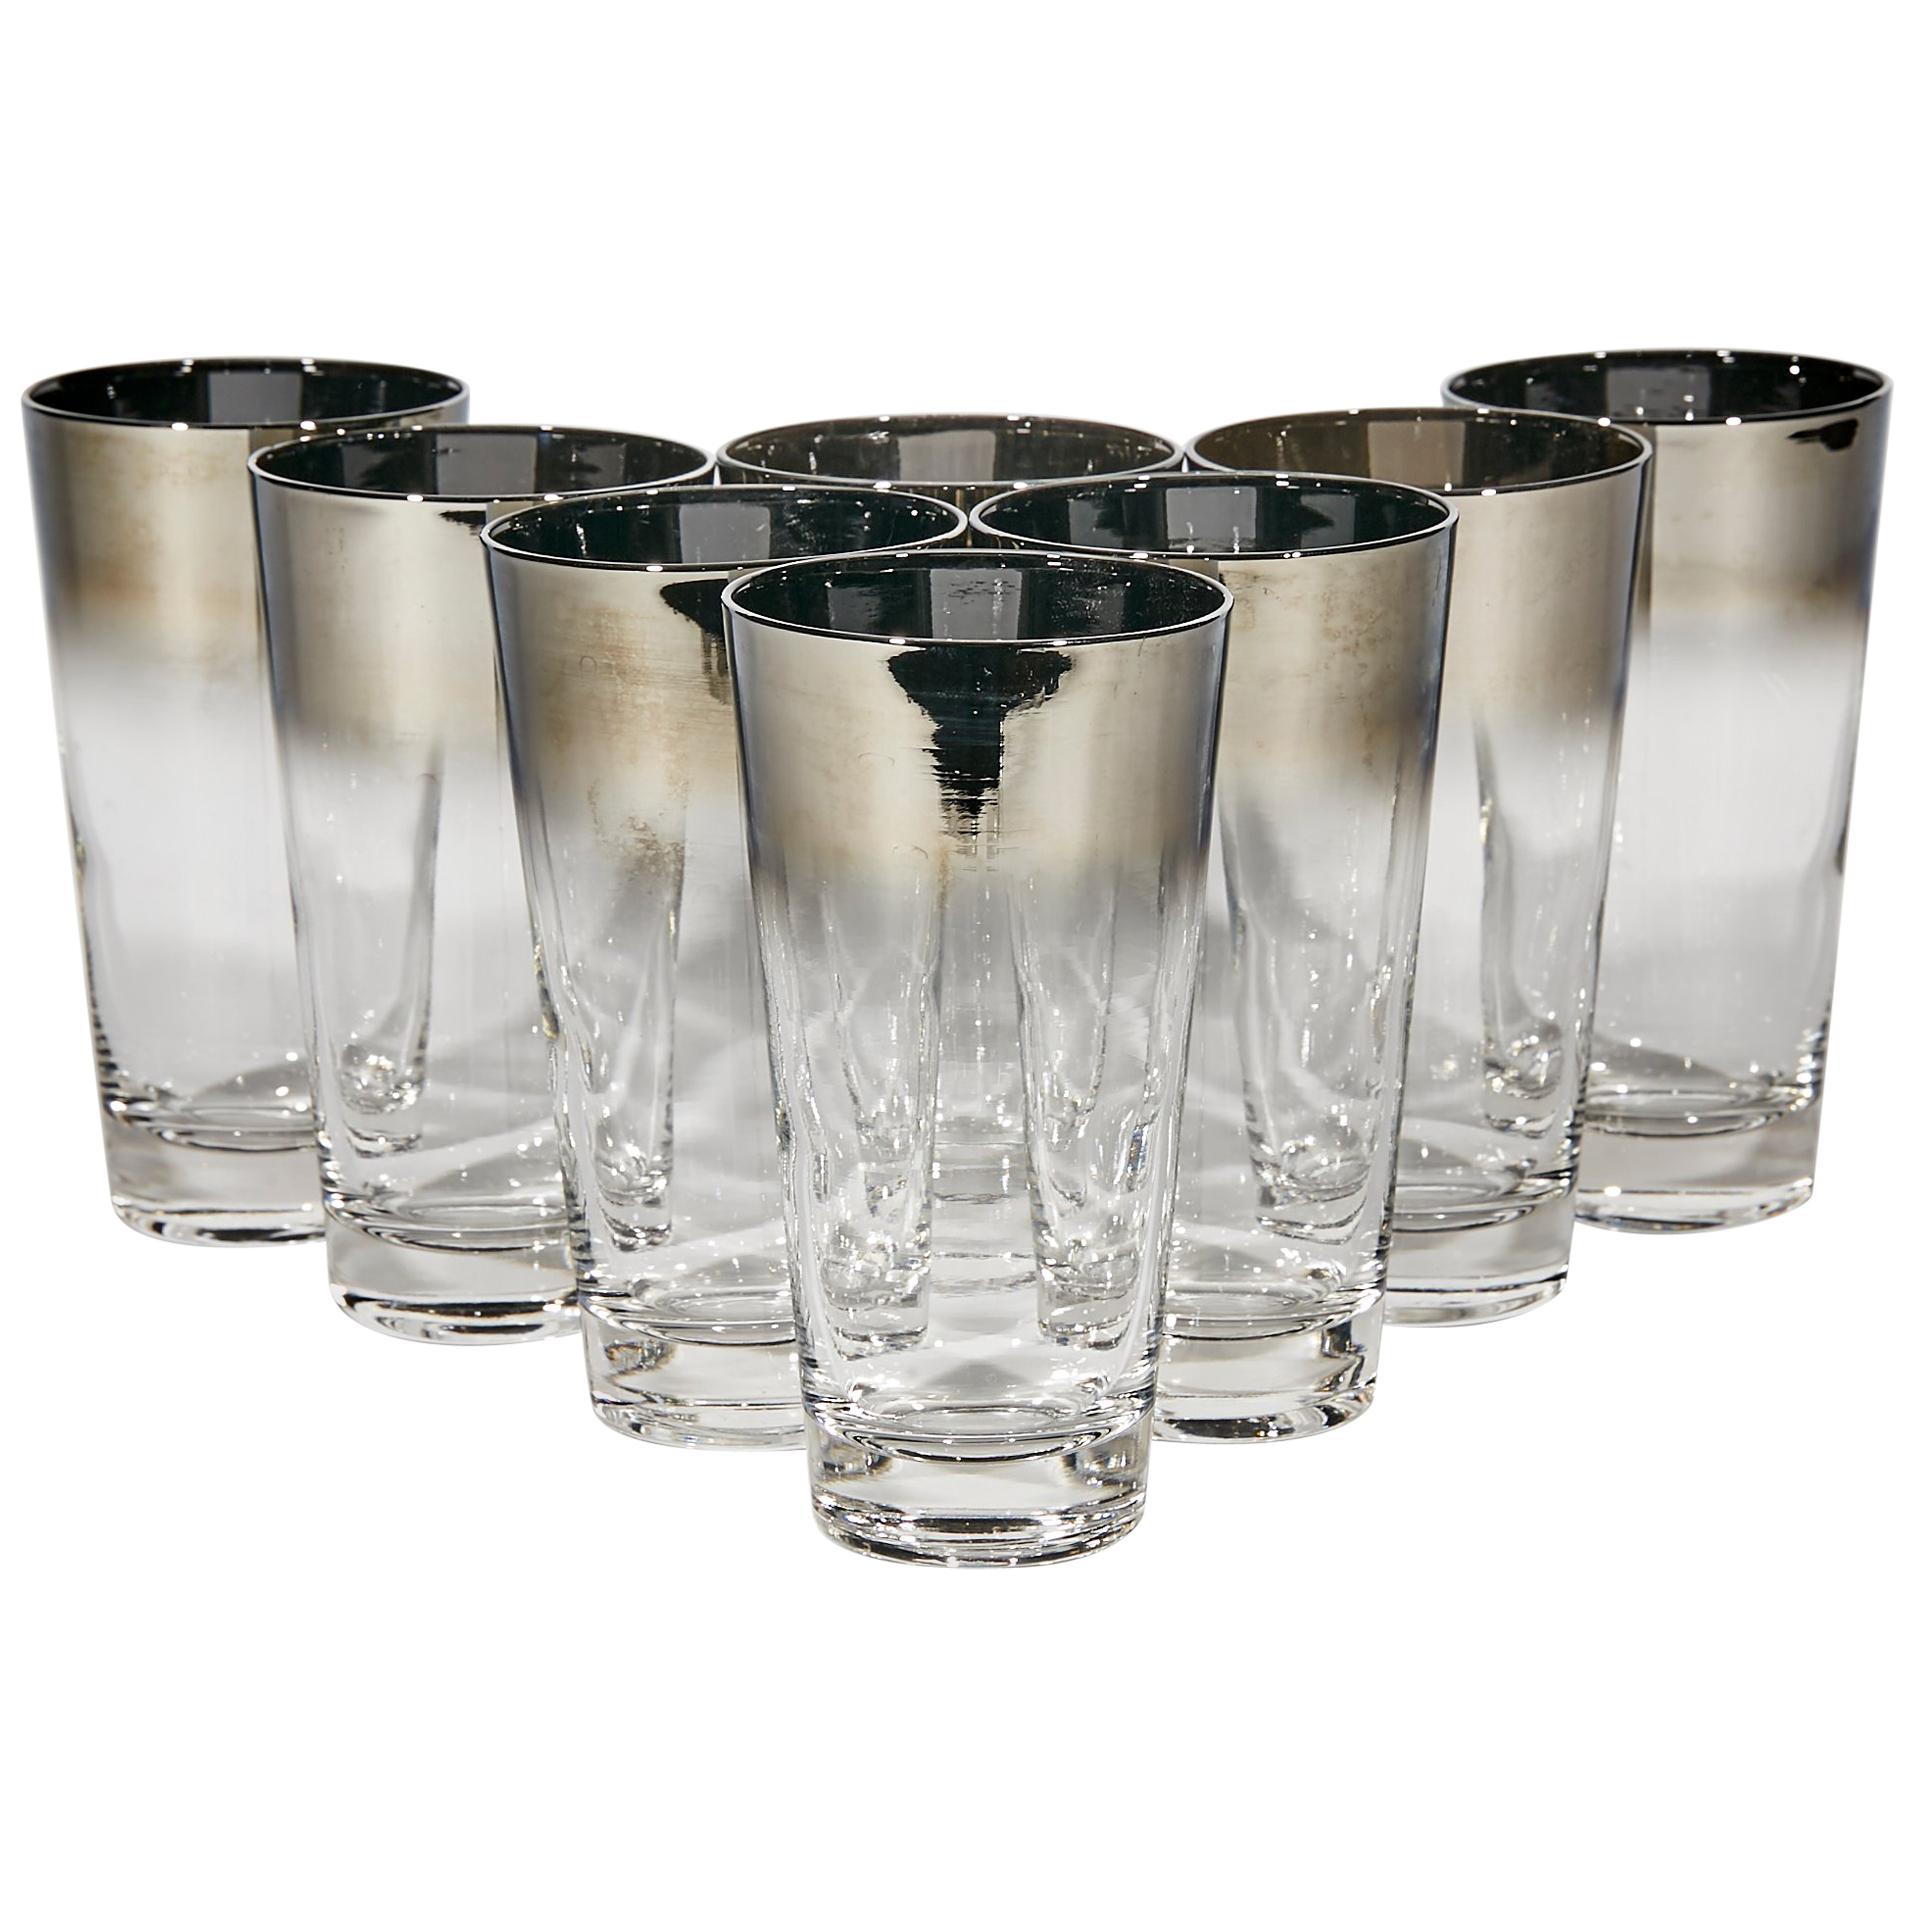 1960s Silver-Fade Tall Glass Bar Tumblers, Set of 8 For Sale